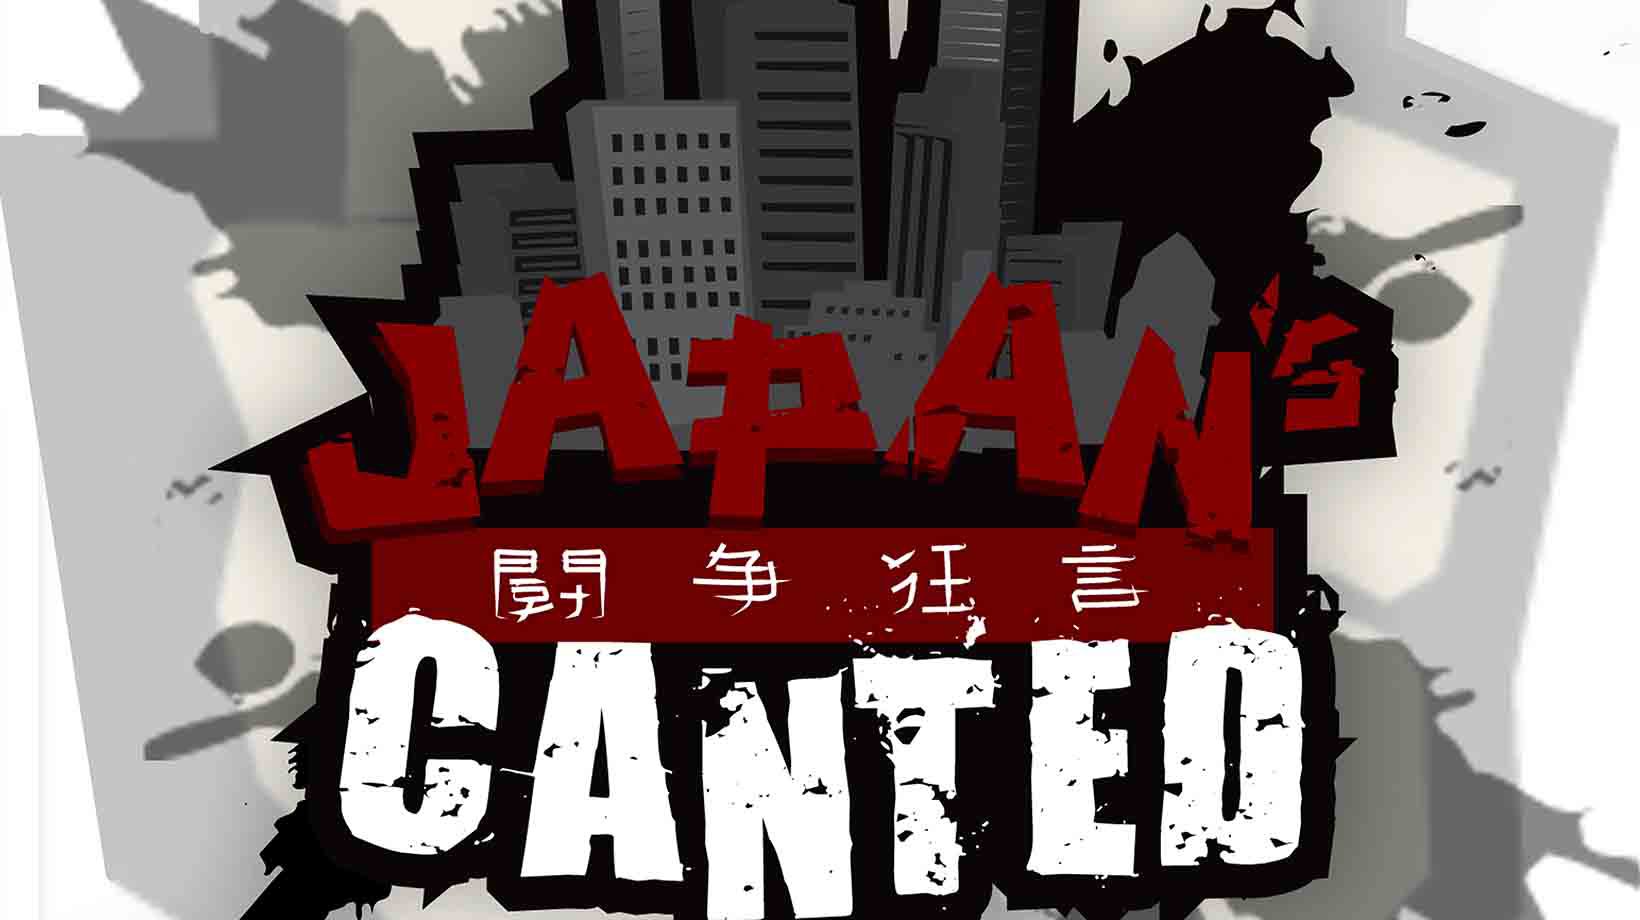 Japan's canted